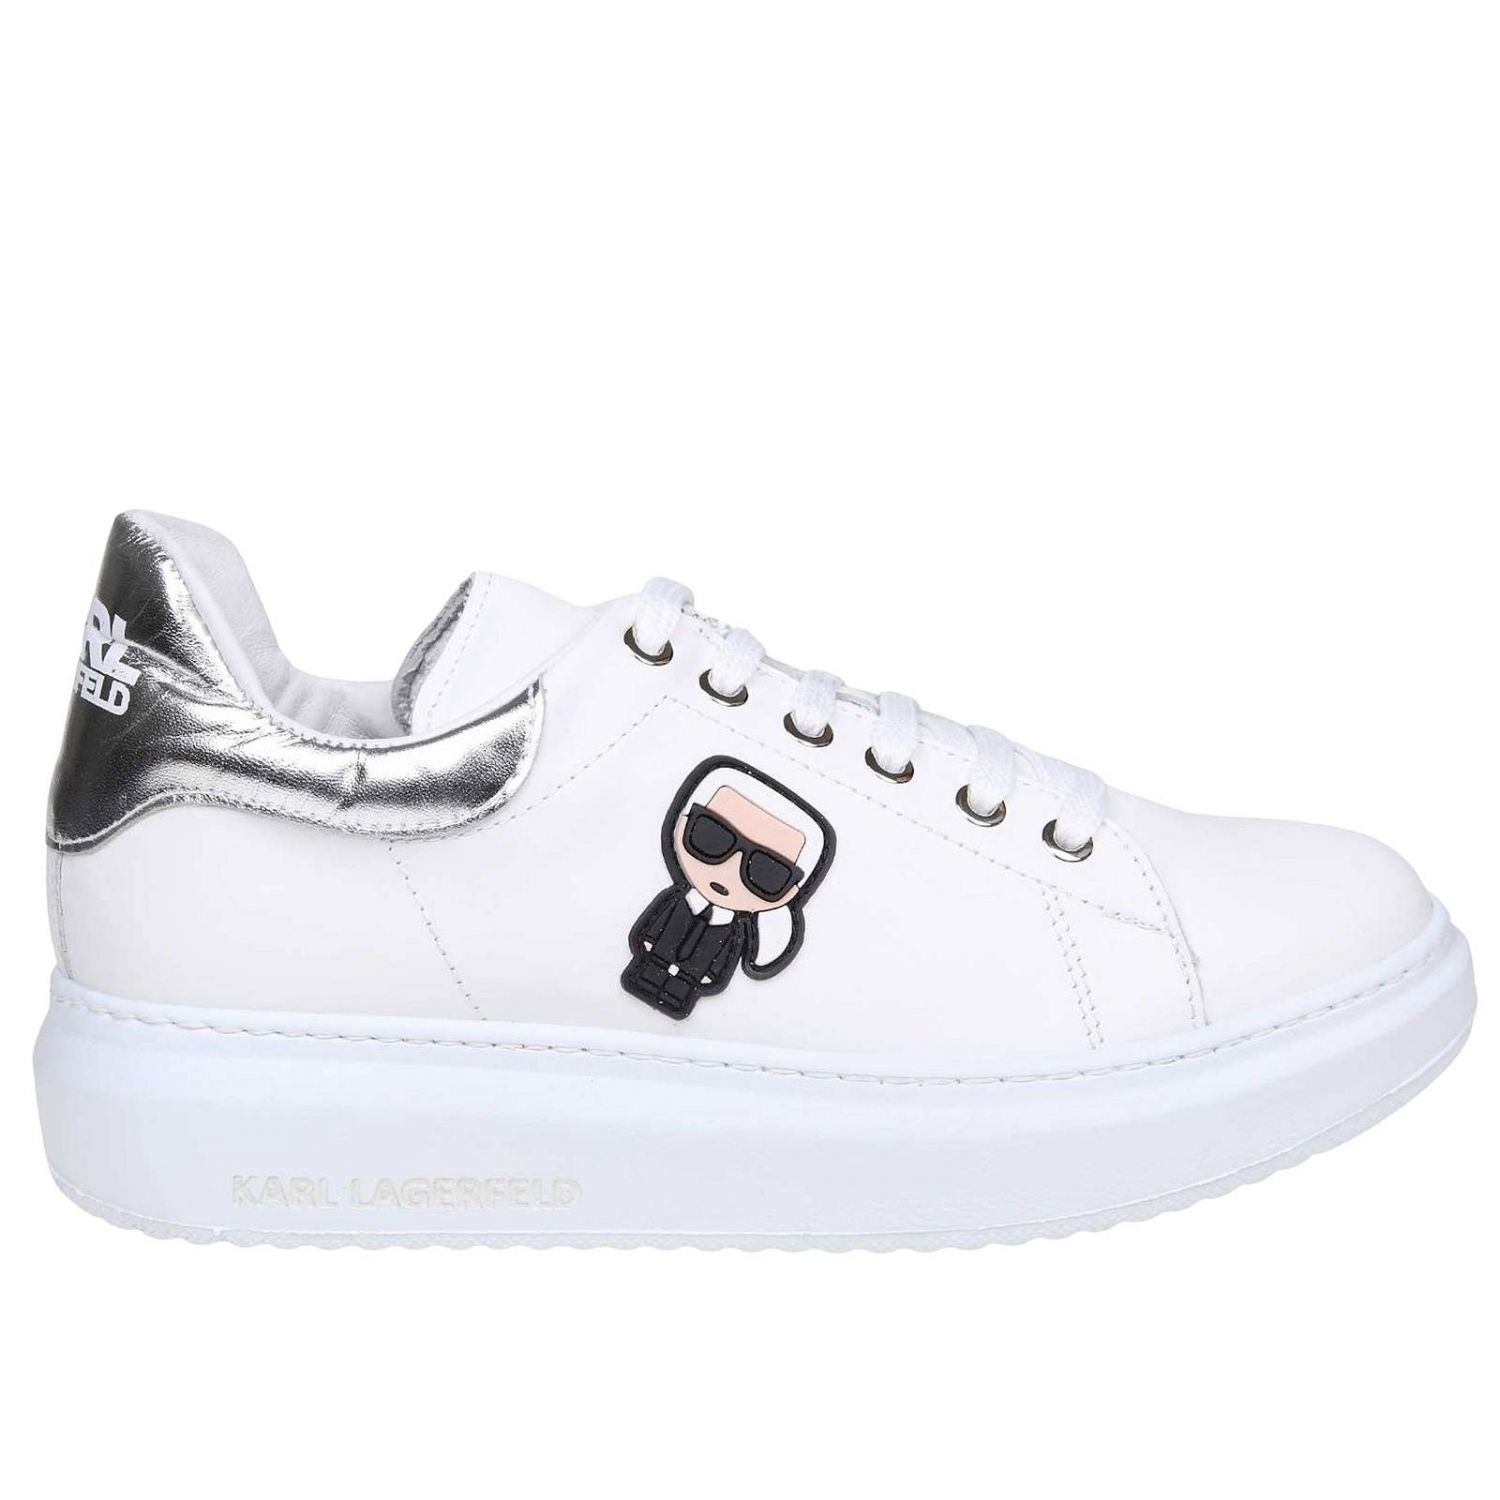 karl lagerfeld white shoes